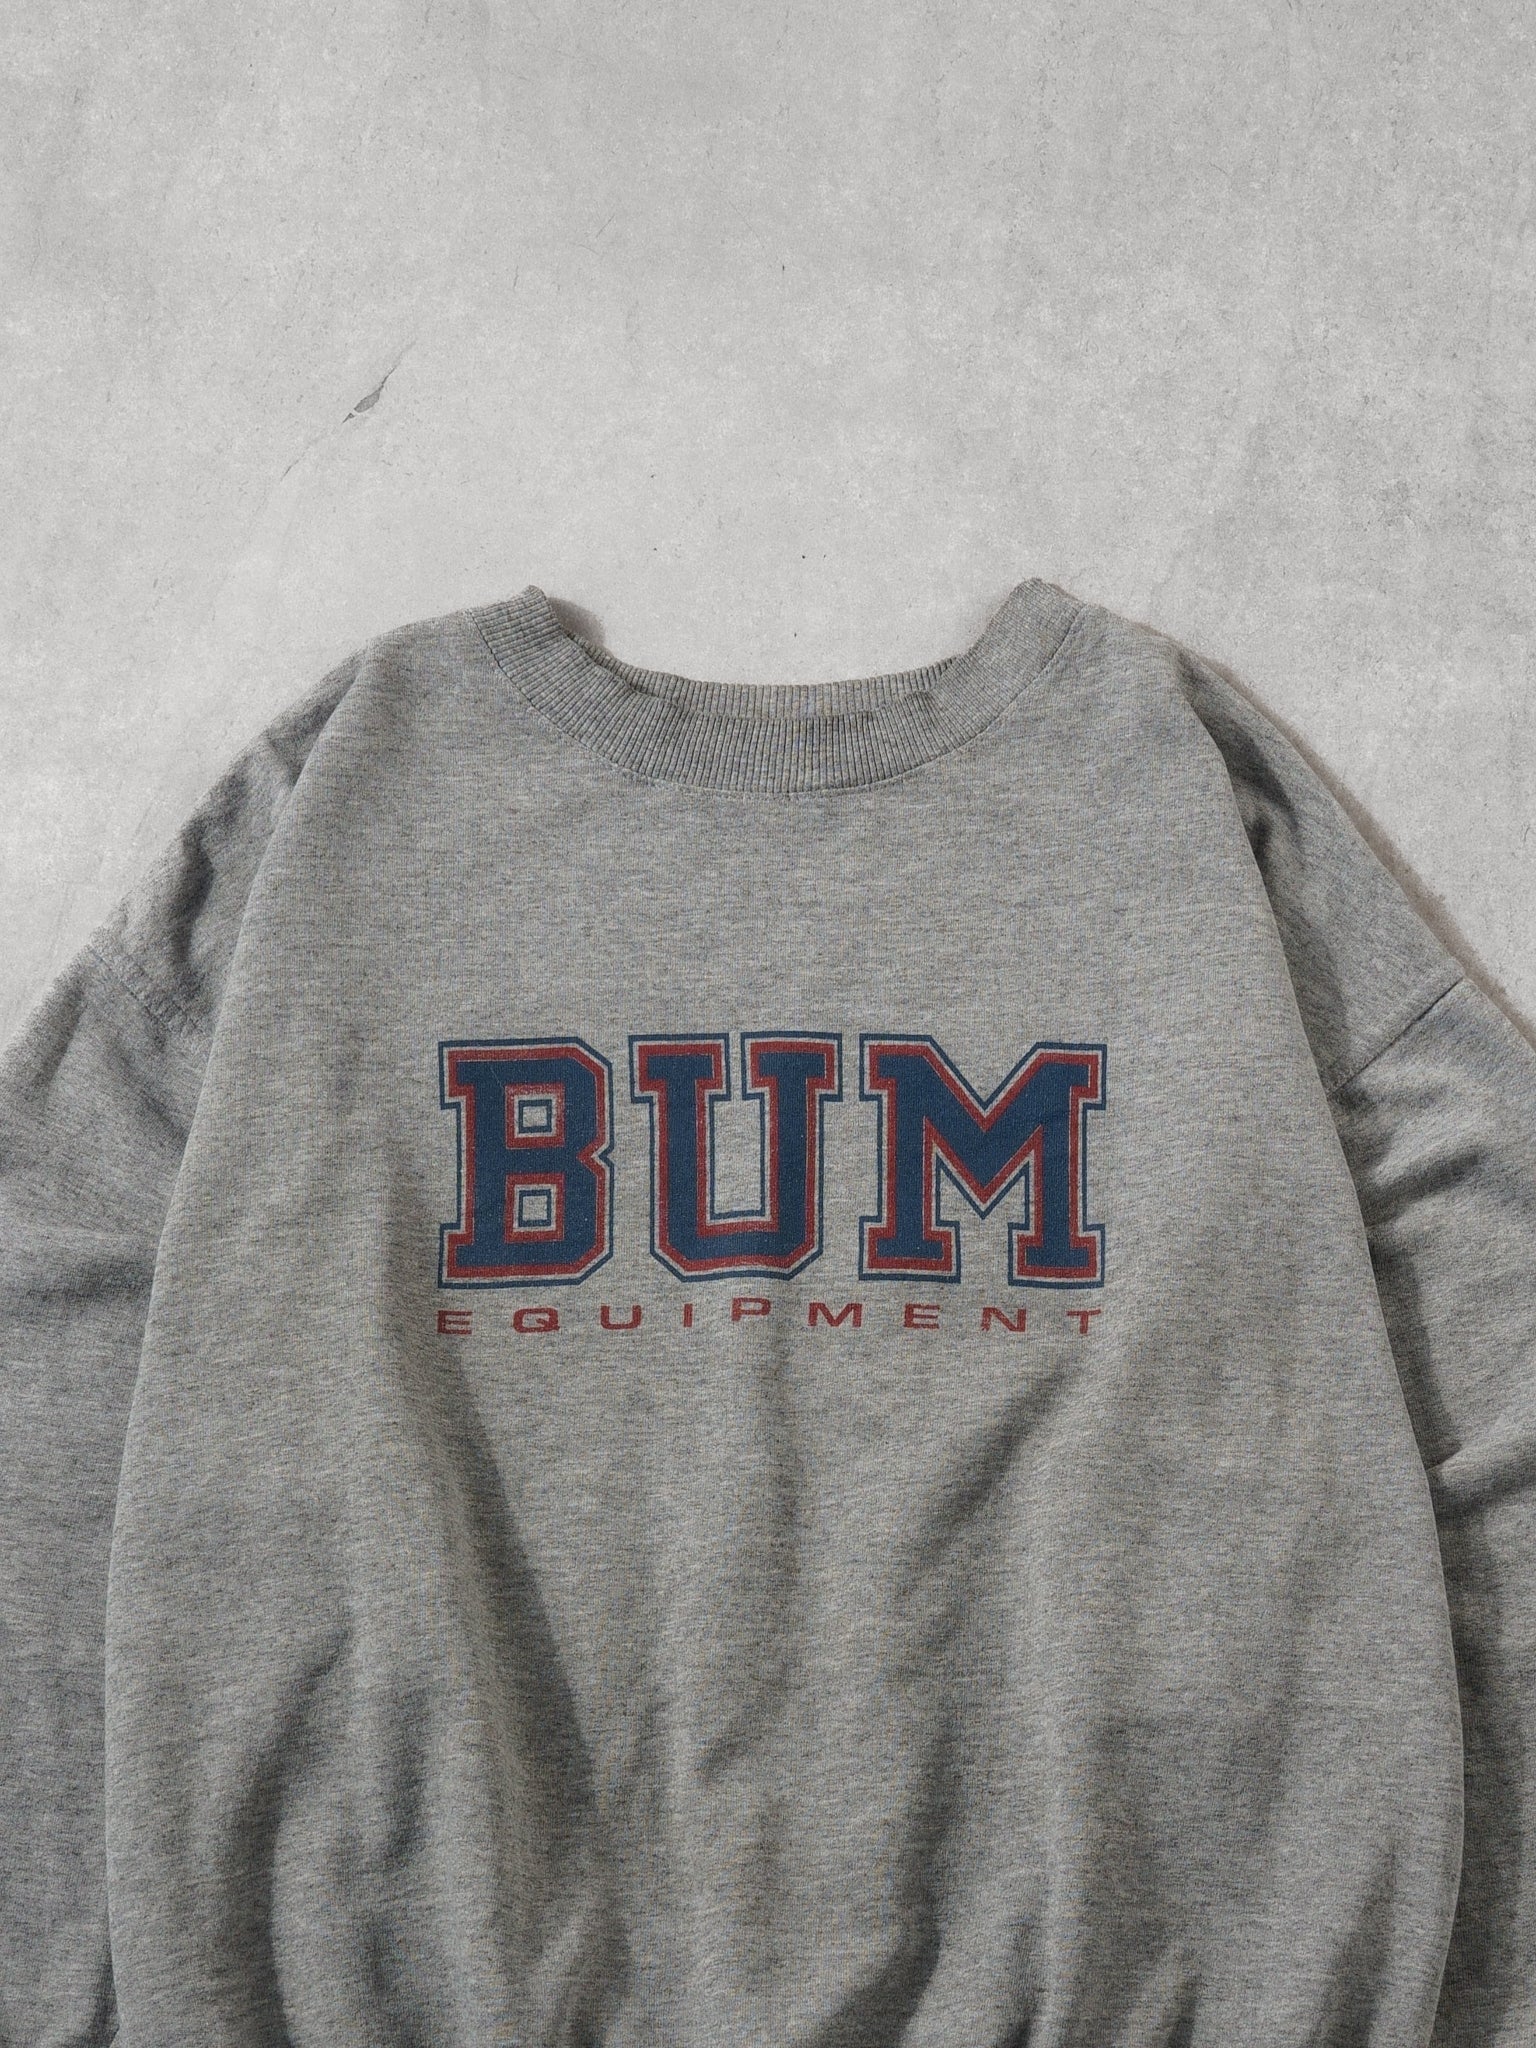 Vintage 90s Grey Red and Blue BUM Equipment Crewneck (L)